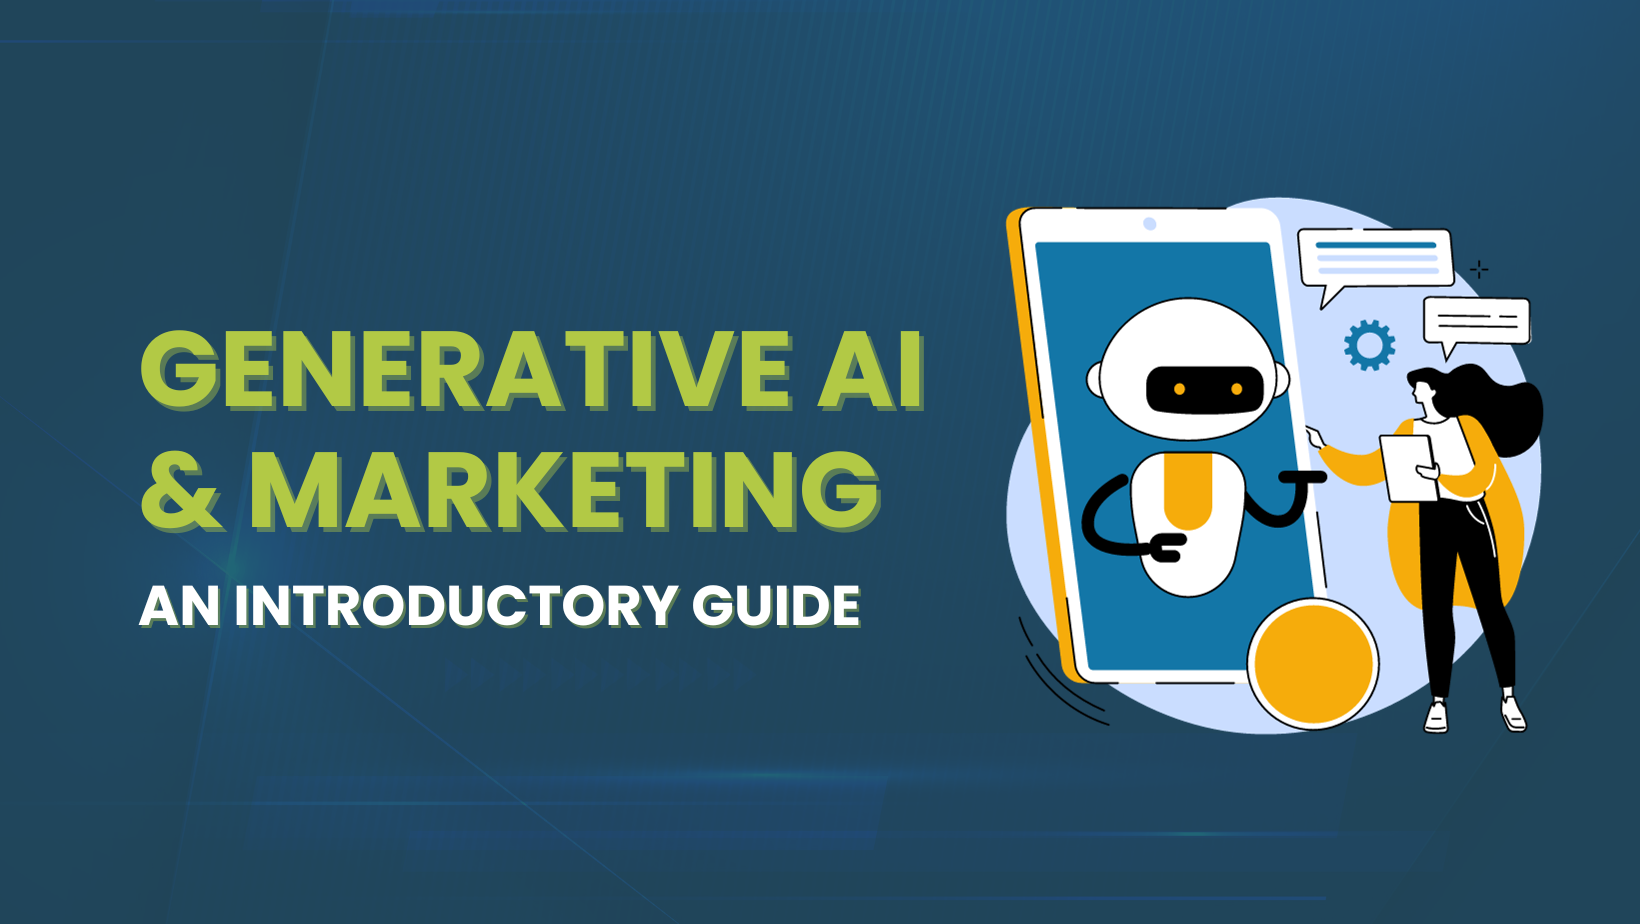 Generative AI & Marketing: An Introductory Guide graphic